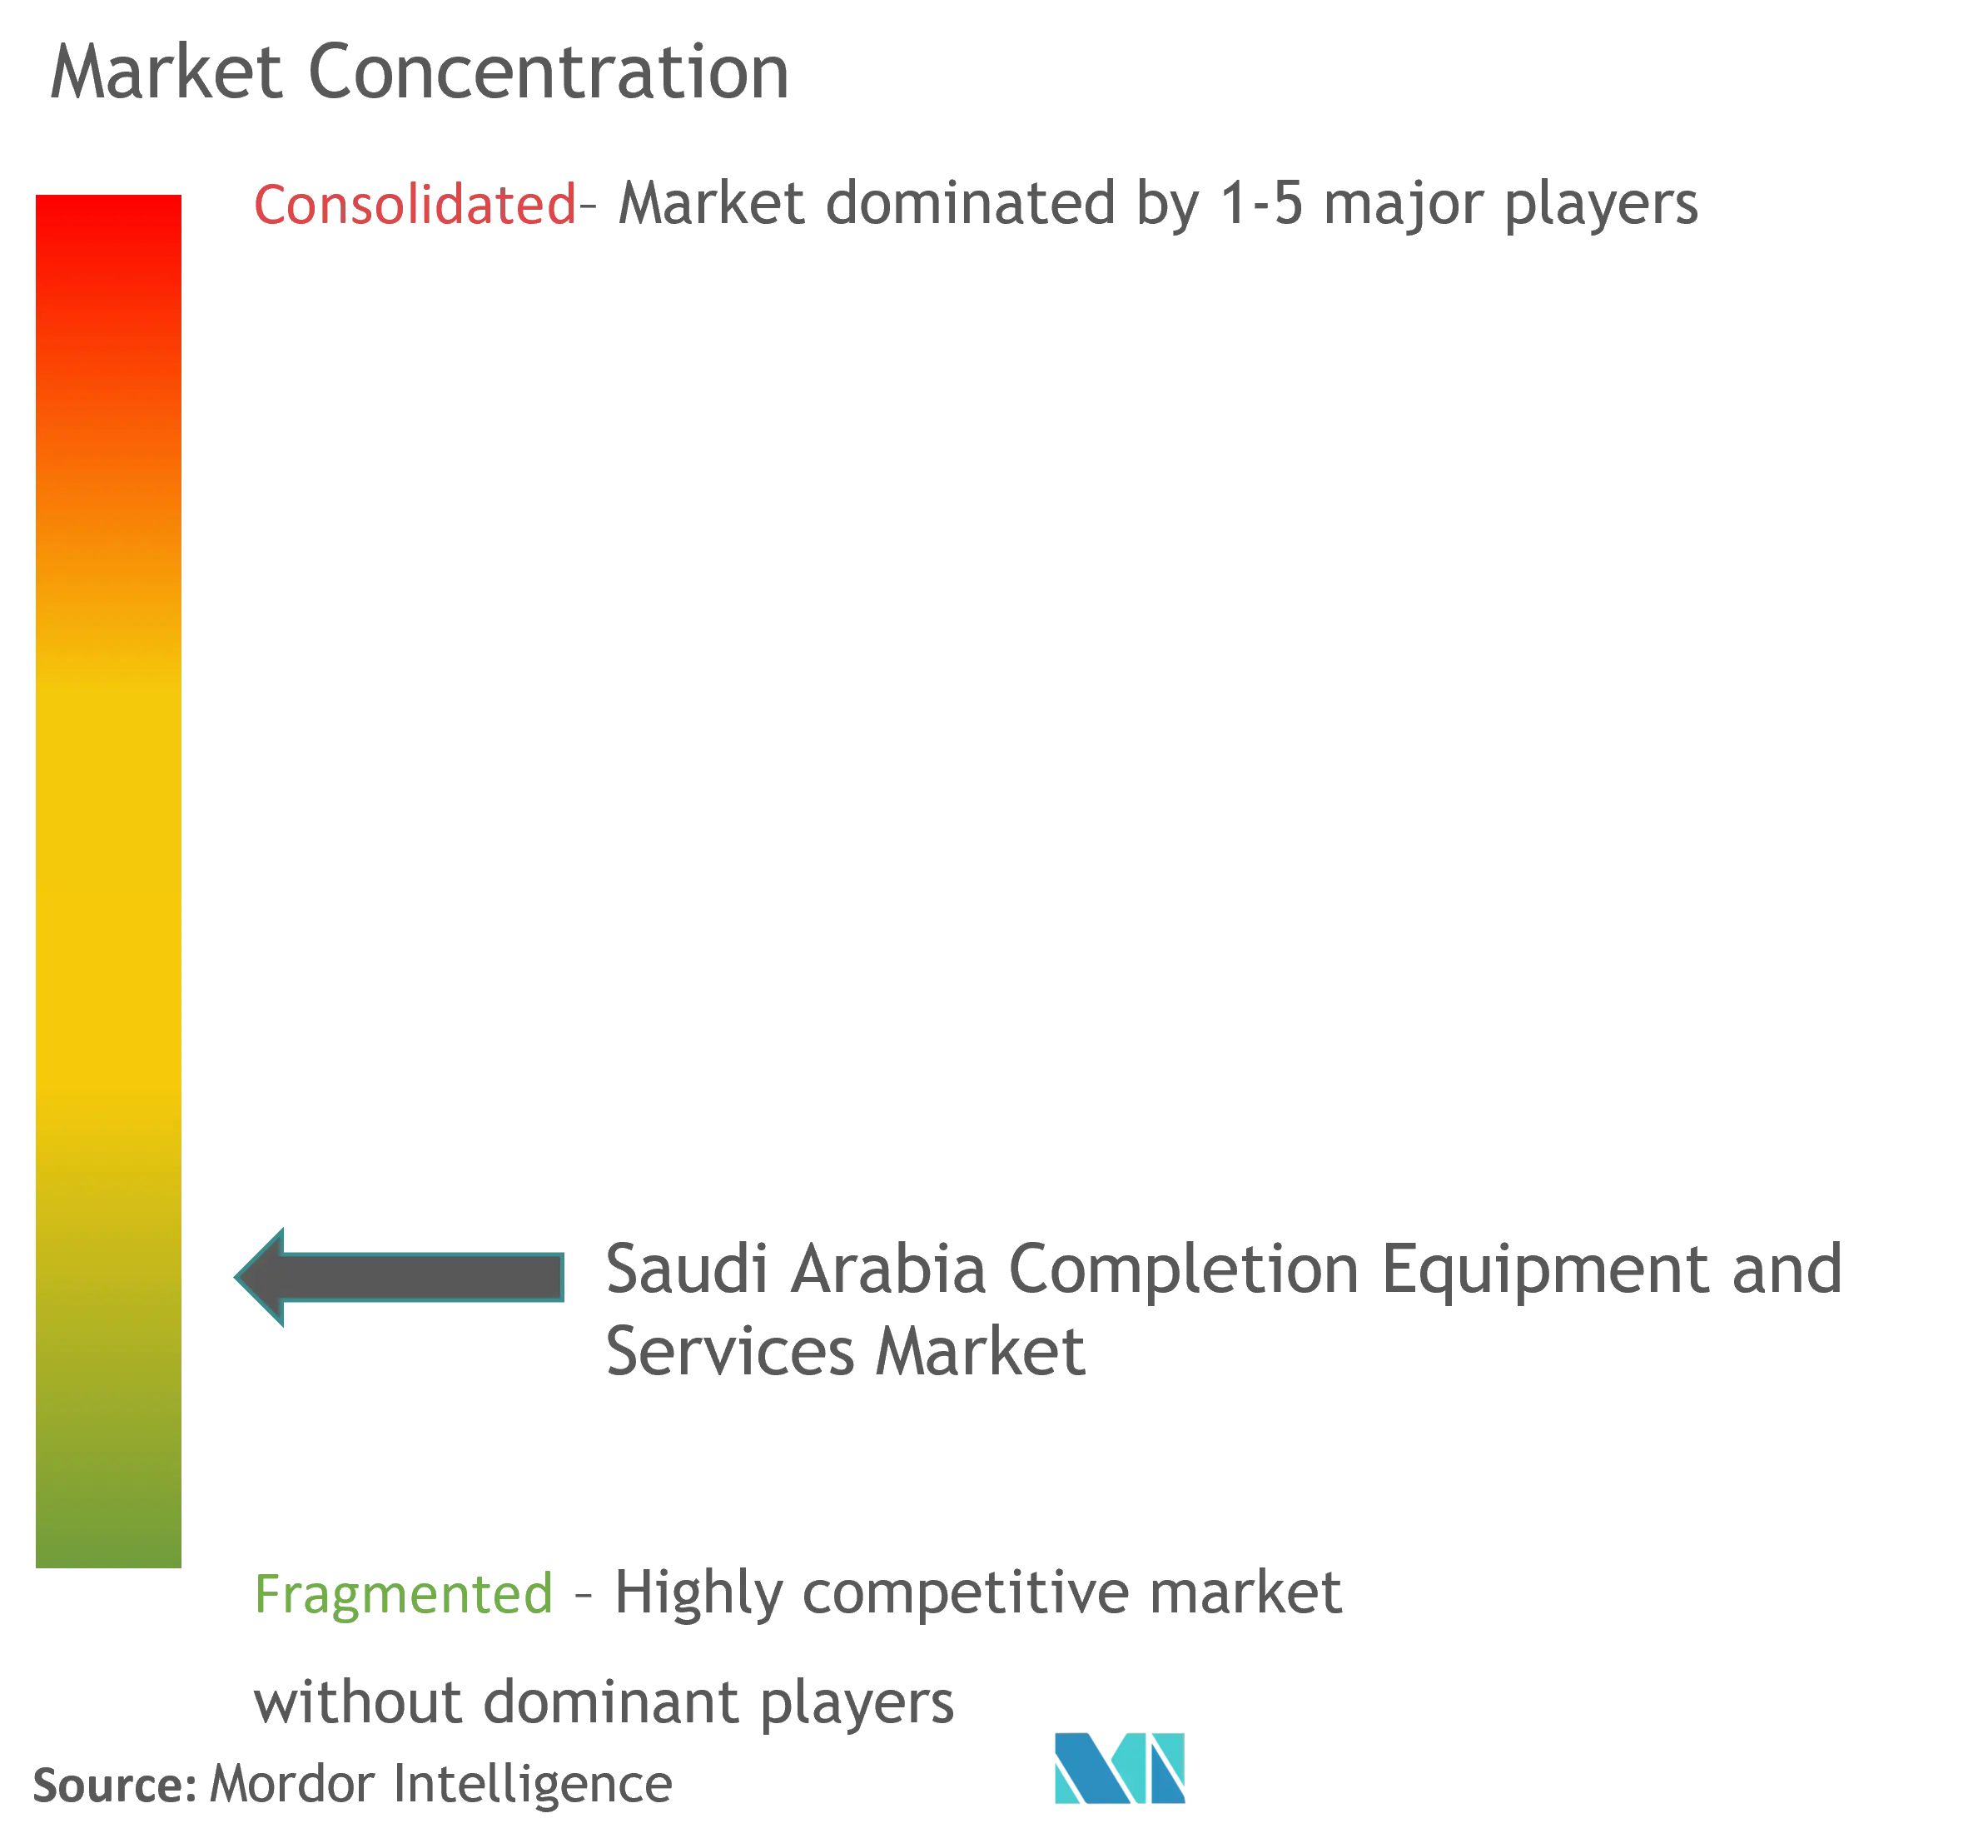 Saudi Arabia Completion Equipment And Services Market Concentration